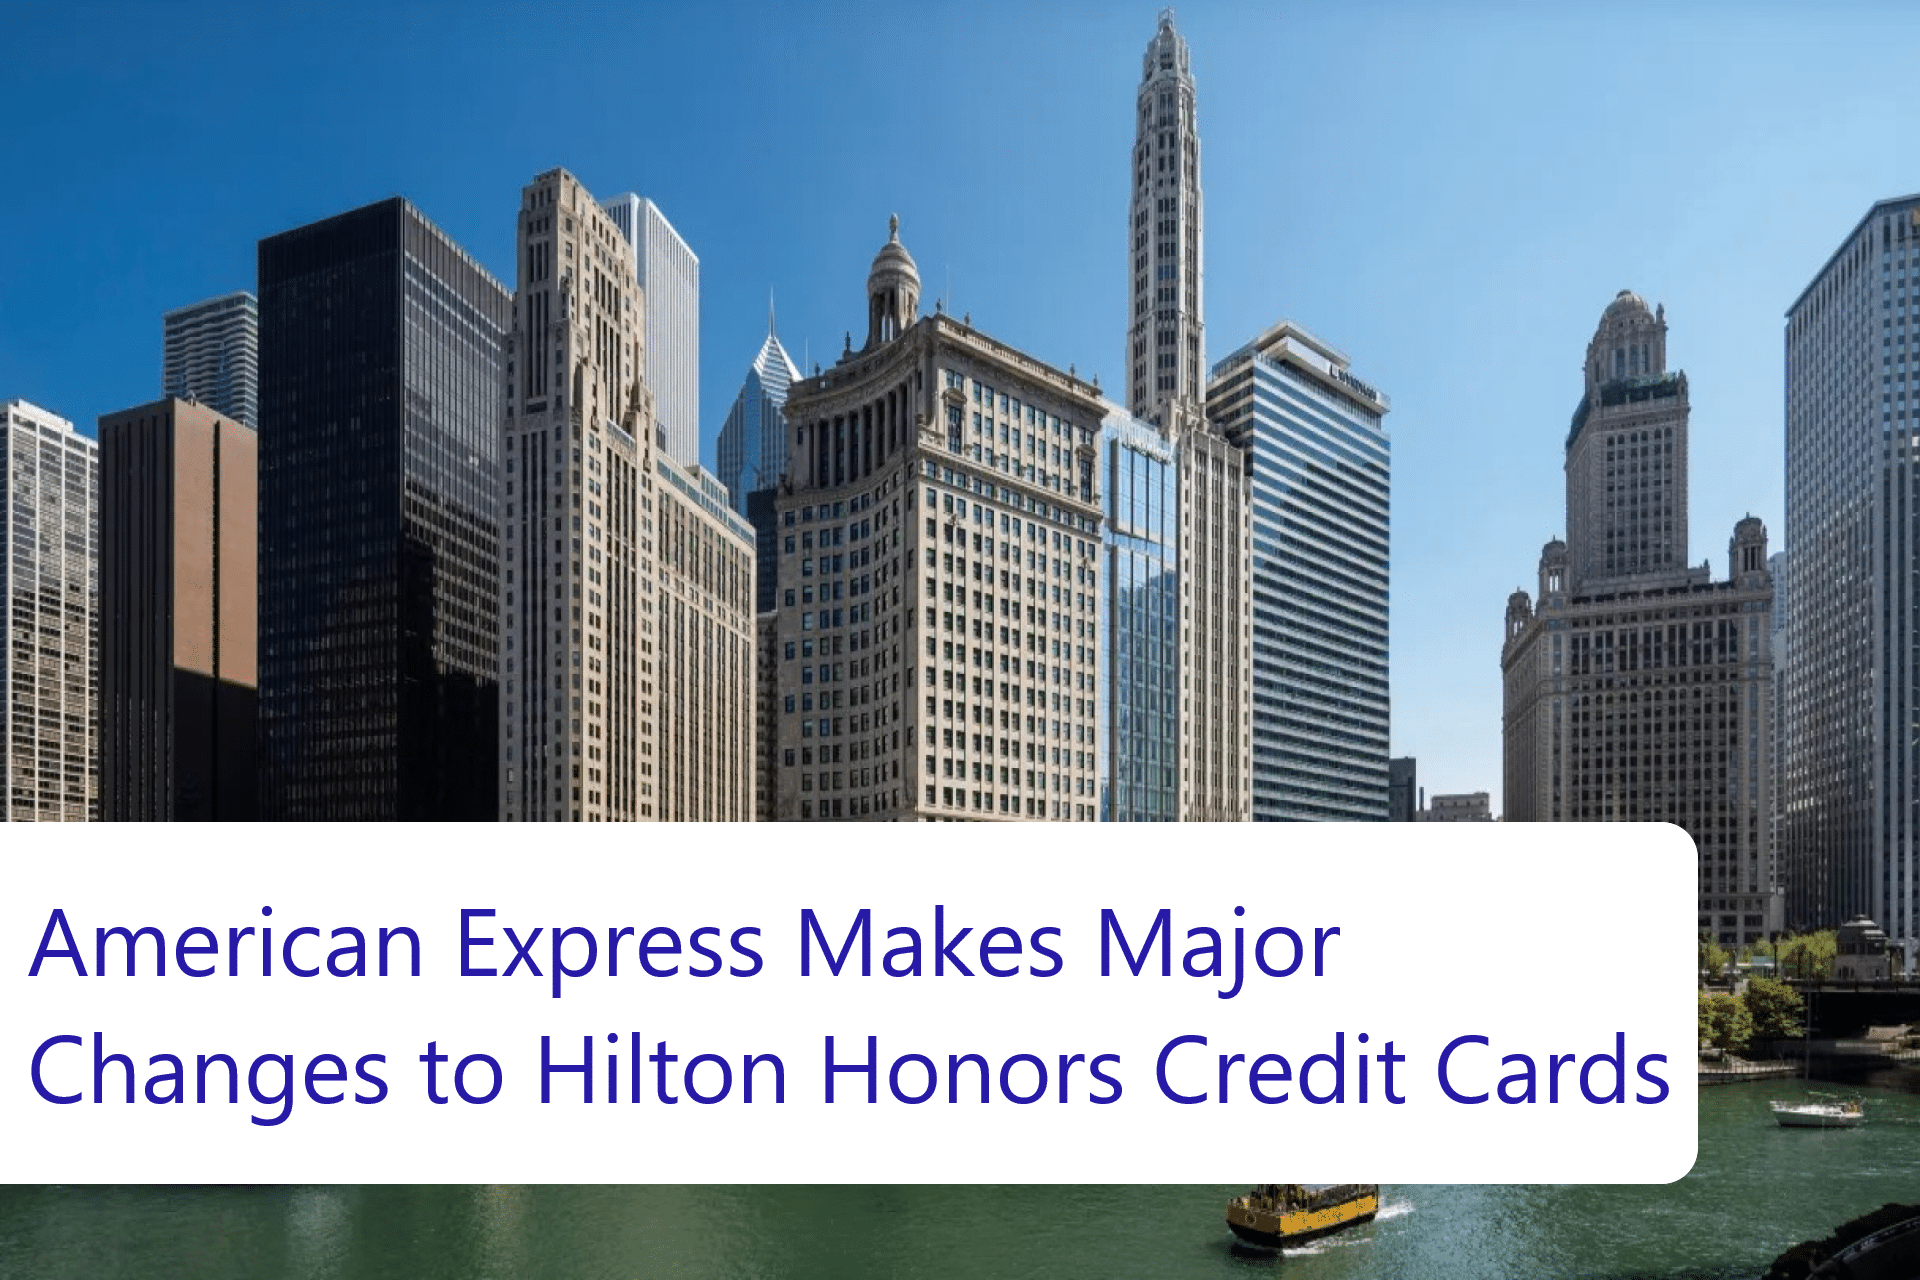 Hilton Honors Credit Cards from American Express get major changes